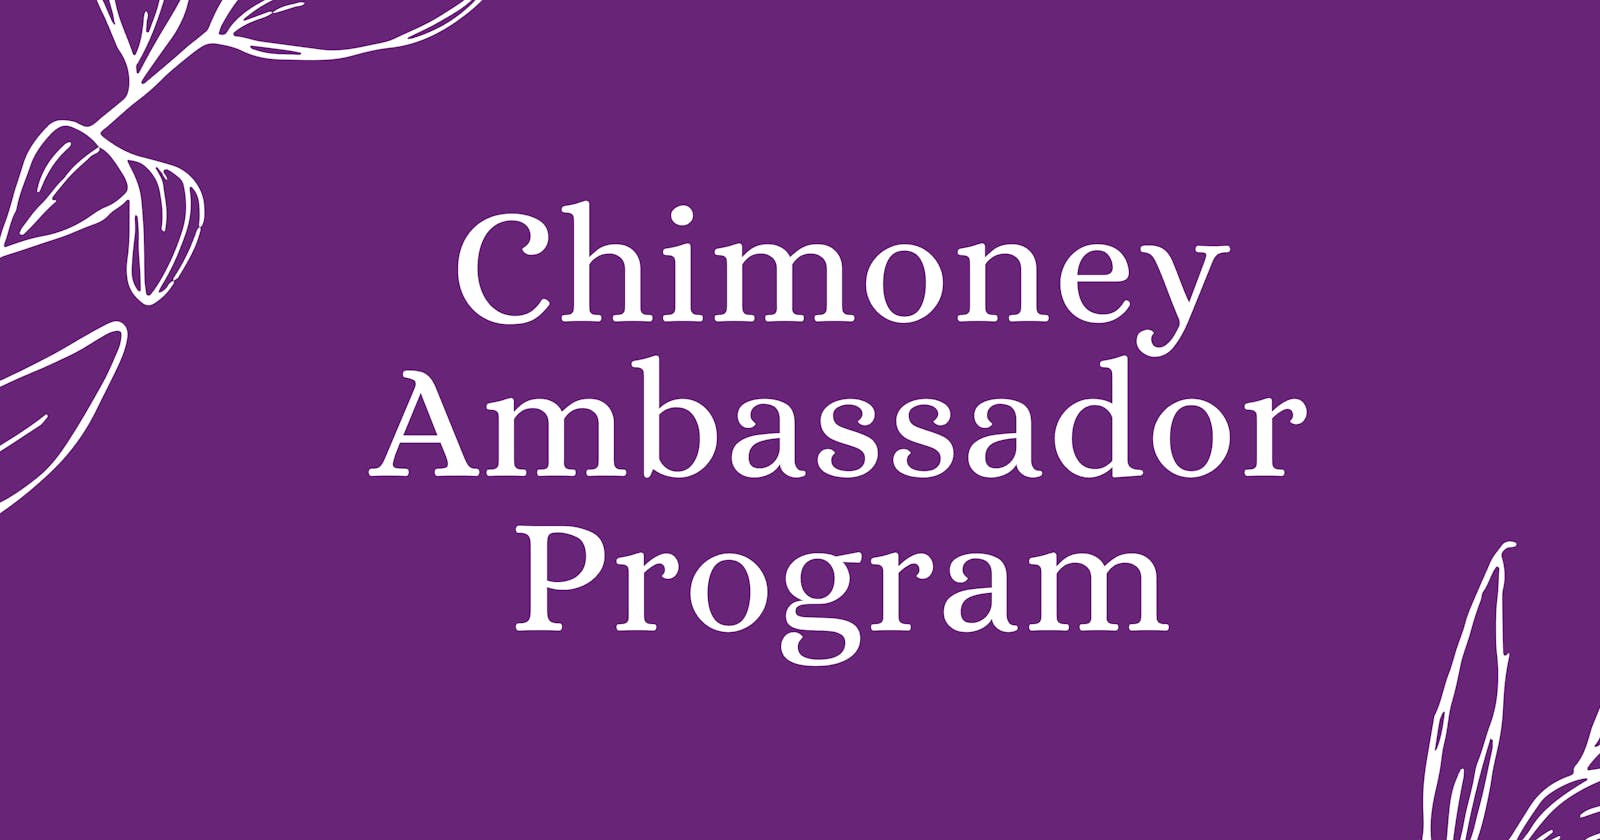 Chimoney Ambassador Program: A Year of Growth, Connection, and Impact